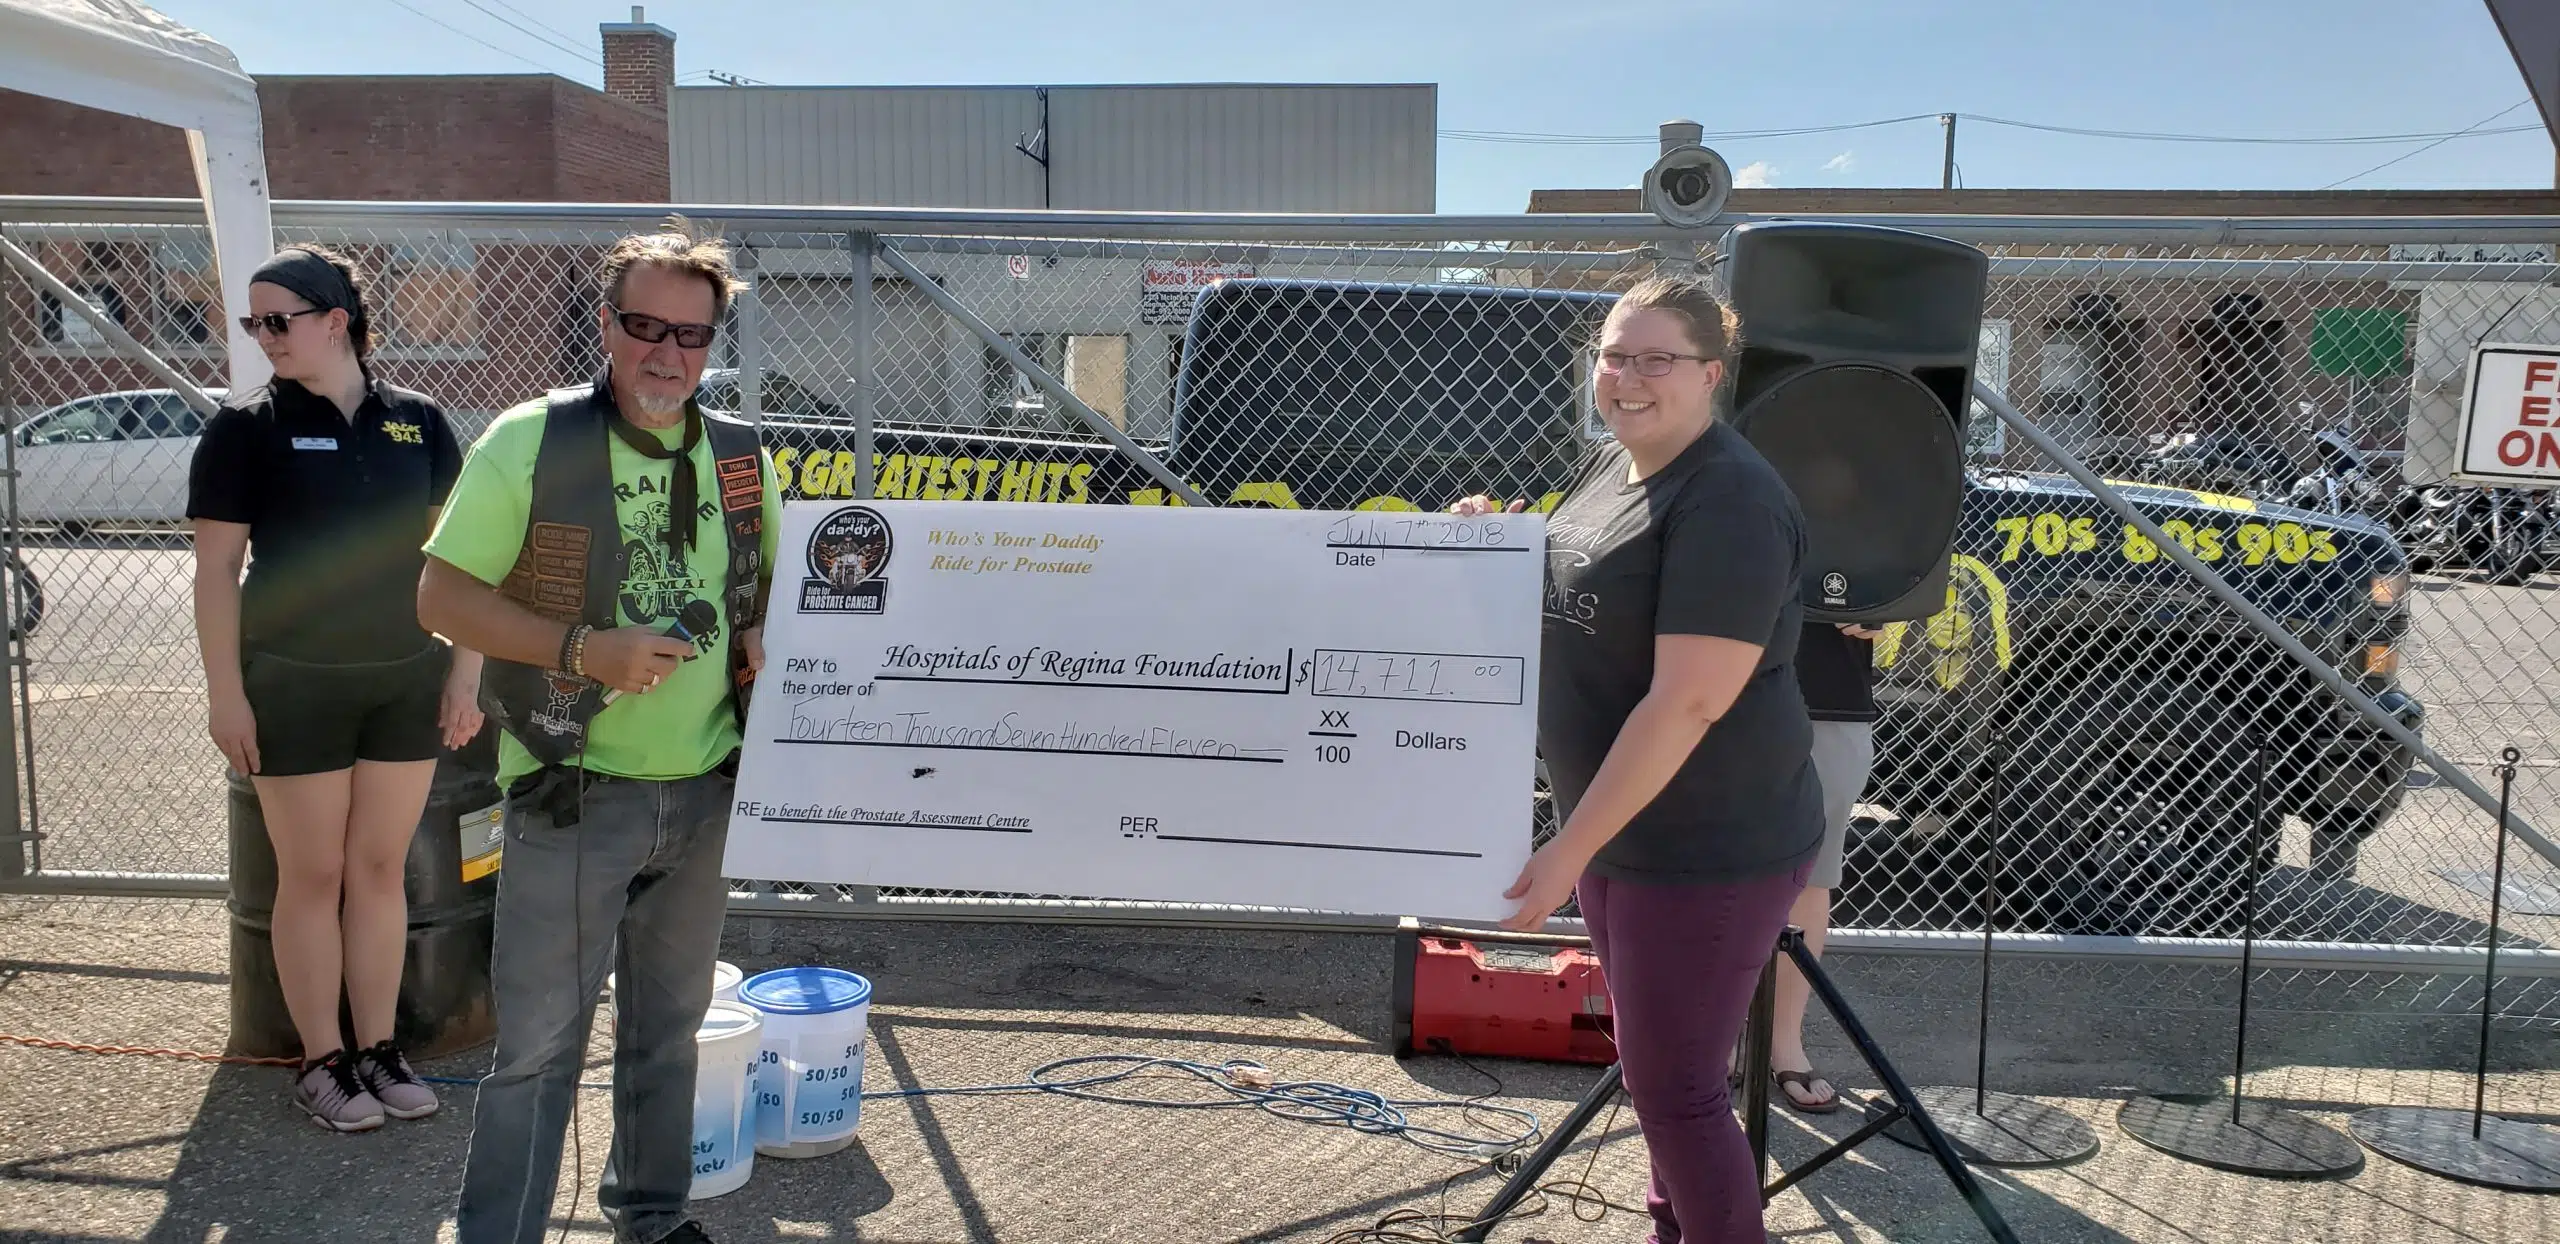 Jack 94.5 - Motorcycle enthusiasts raise $14,711 for Regina’s Prostate Assessment Centre